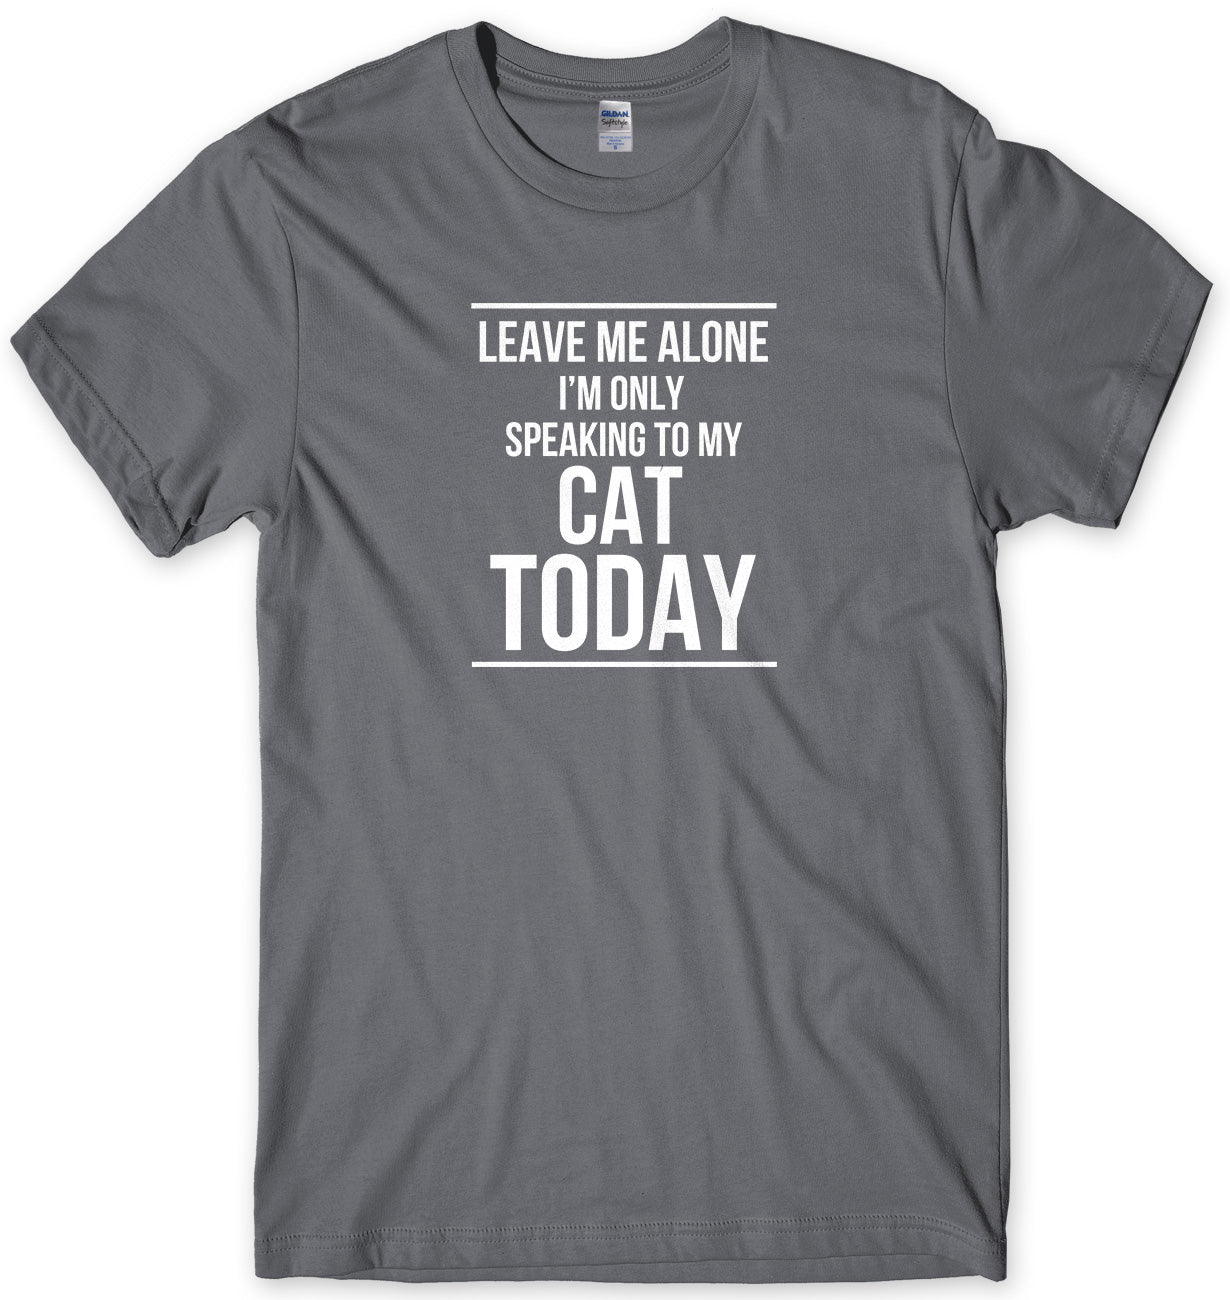 LEAVE ME ALONE I'M ONLY SPEAKING TO MY CAT TODAY MENS FUNNY SLOGAN UNISEX T-SHIRT